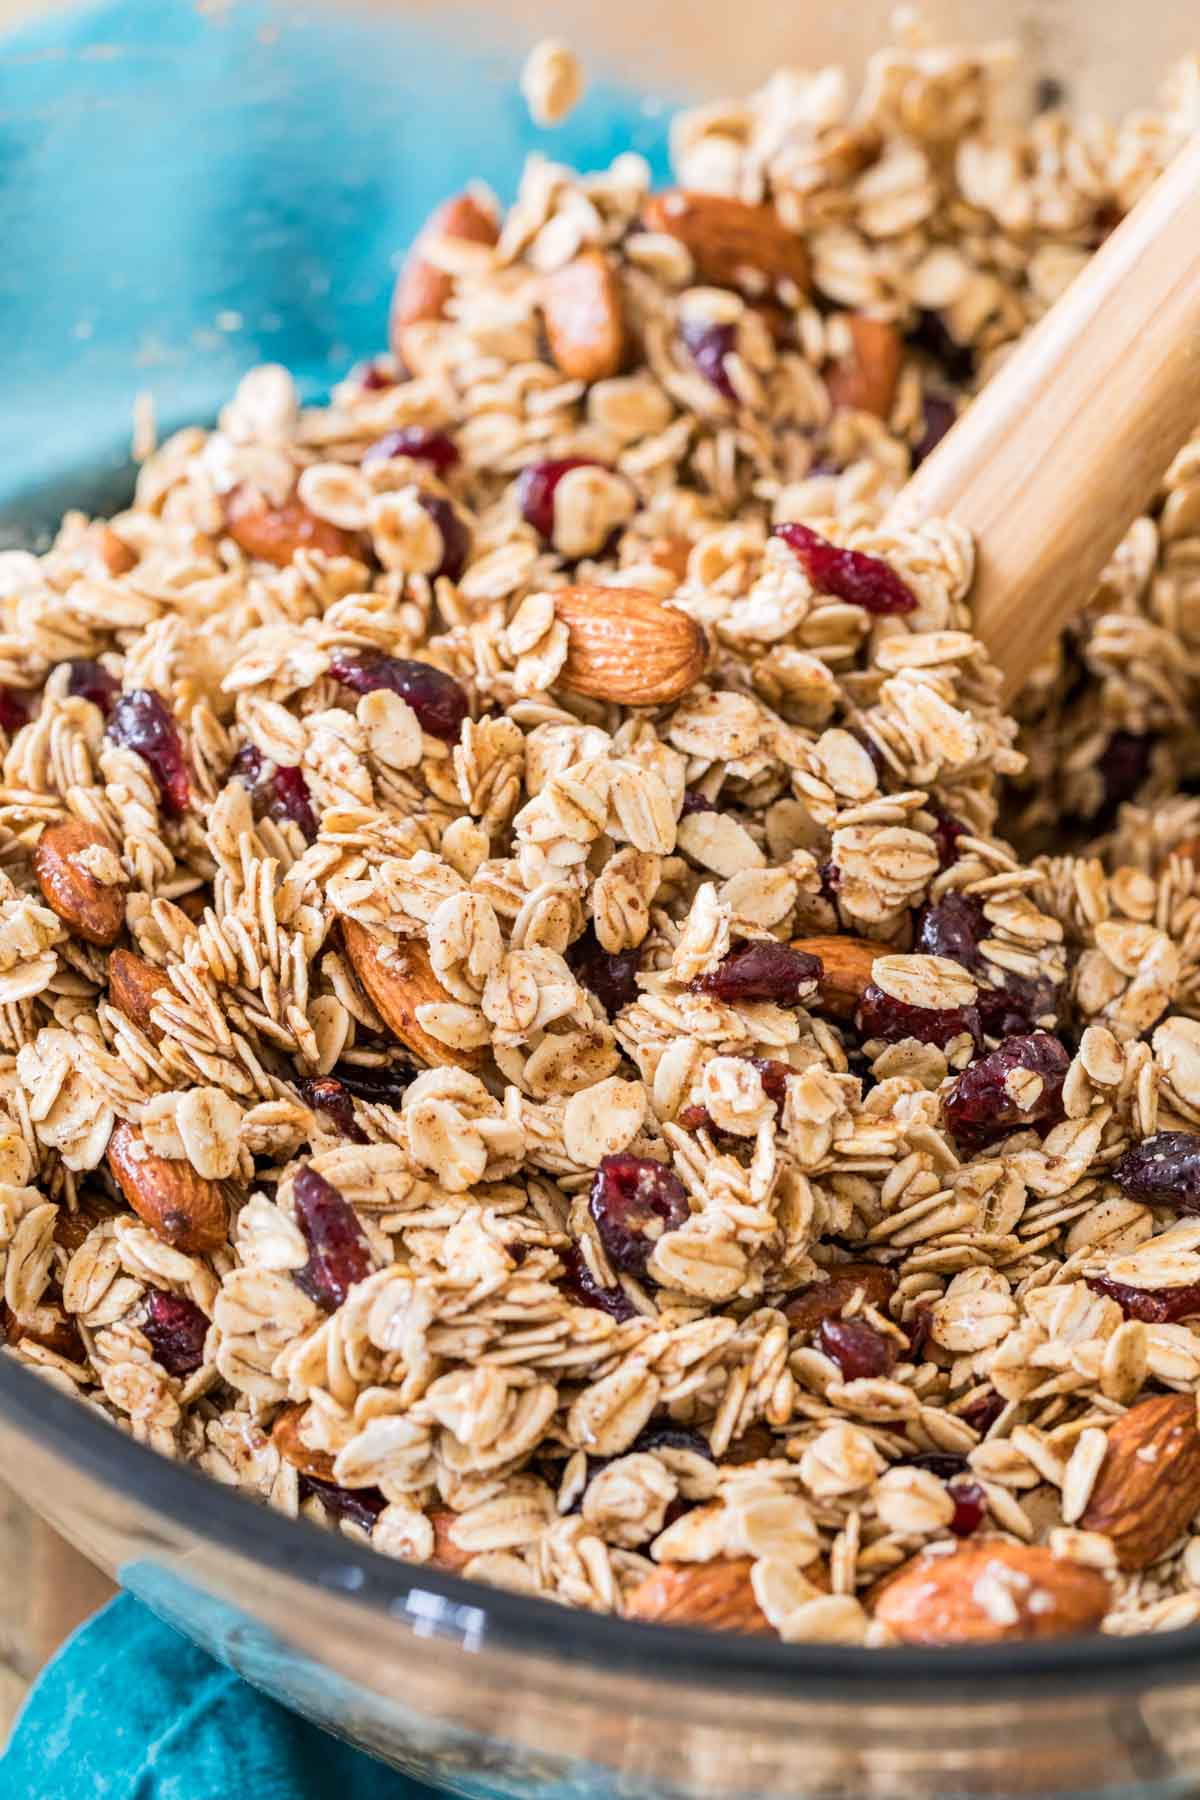 Making homemade granola in a glass bowl - mixing ingredients before baking